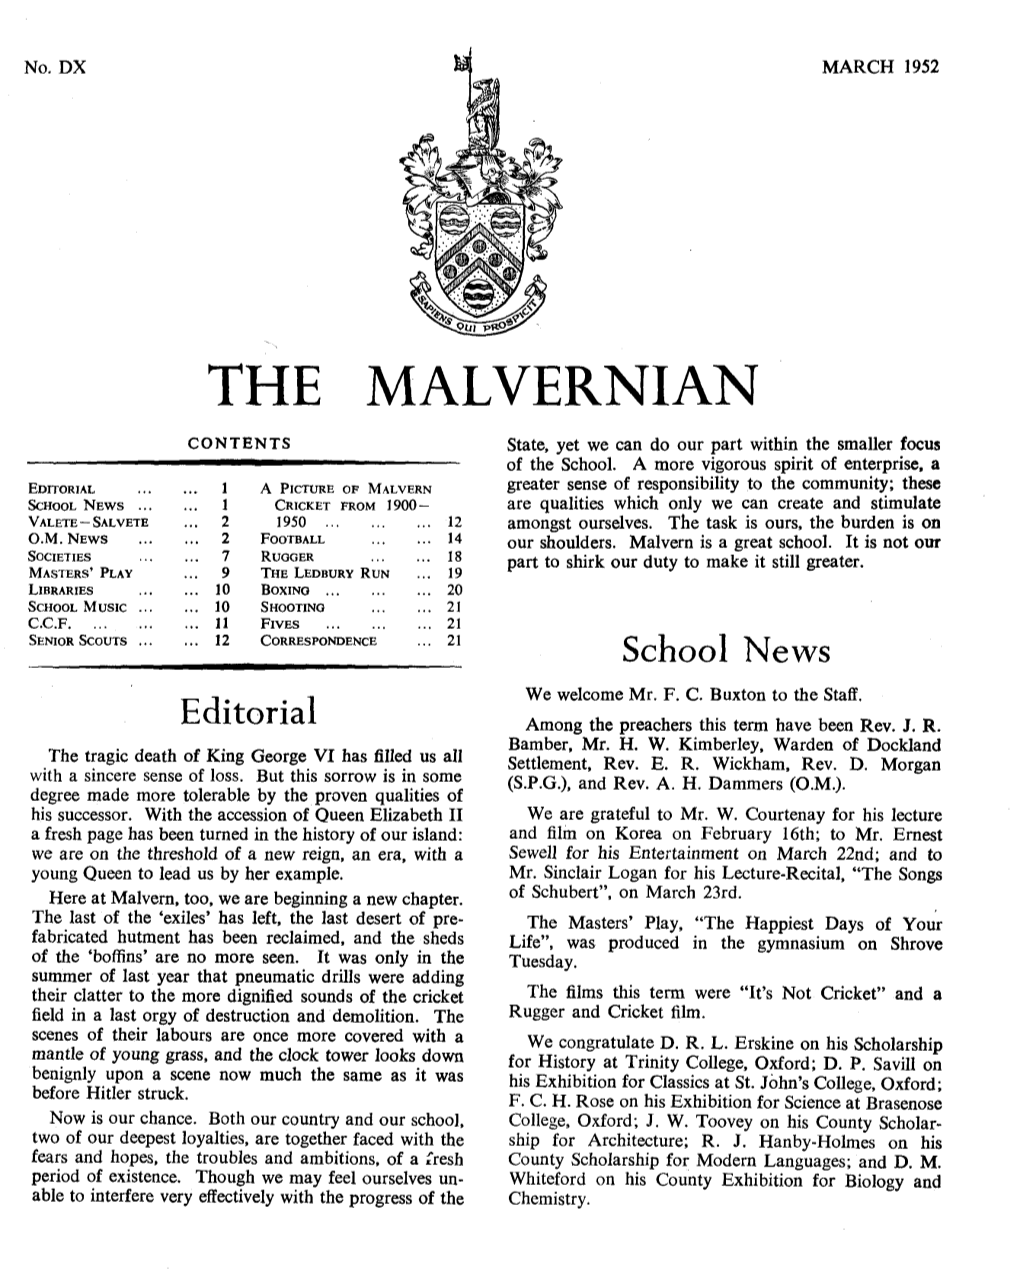 THE MALVERNIAN CONTENTS State, Yet We Can Do Our Part Within the Smaller Focus of the School